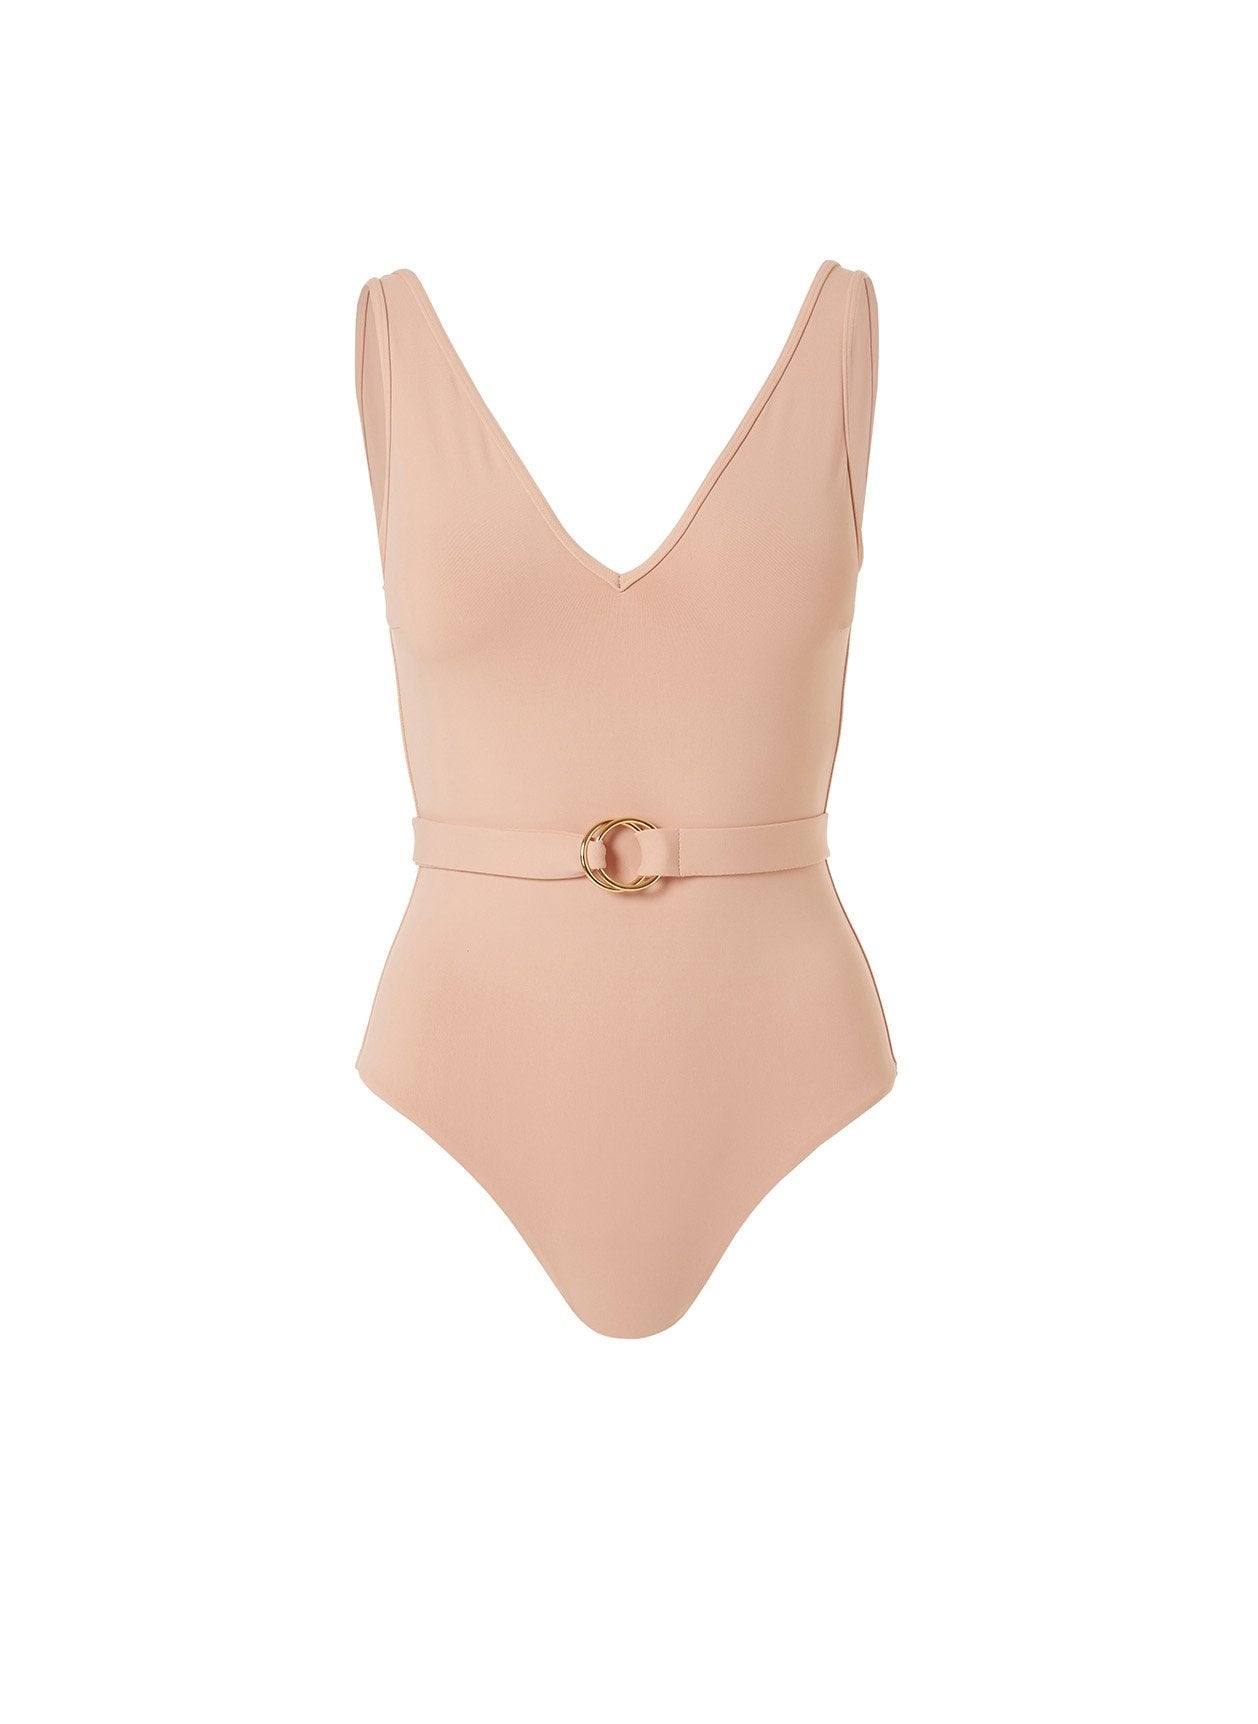 Belize Tan V-Neck Belted One Piece Swimsuit